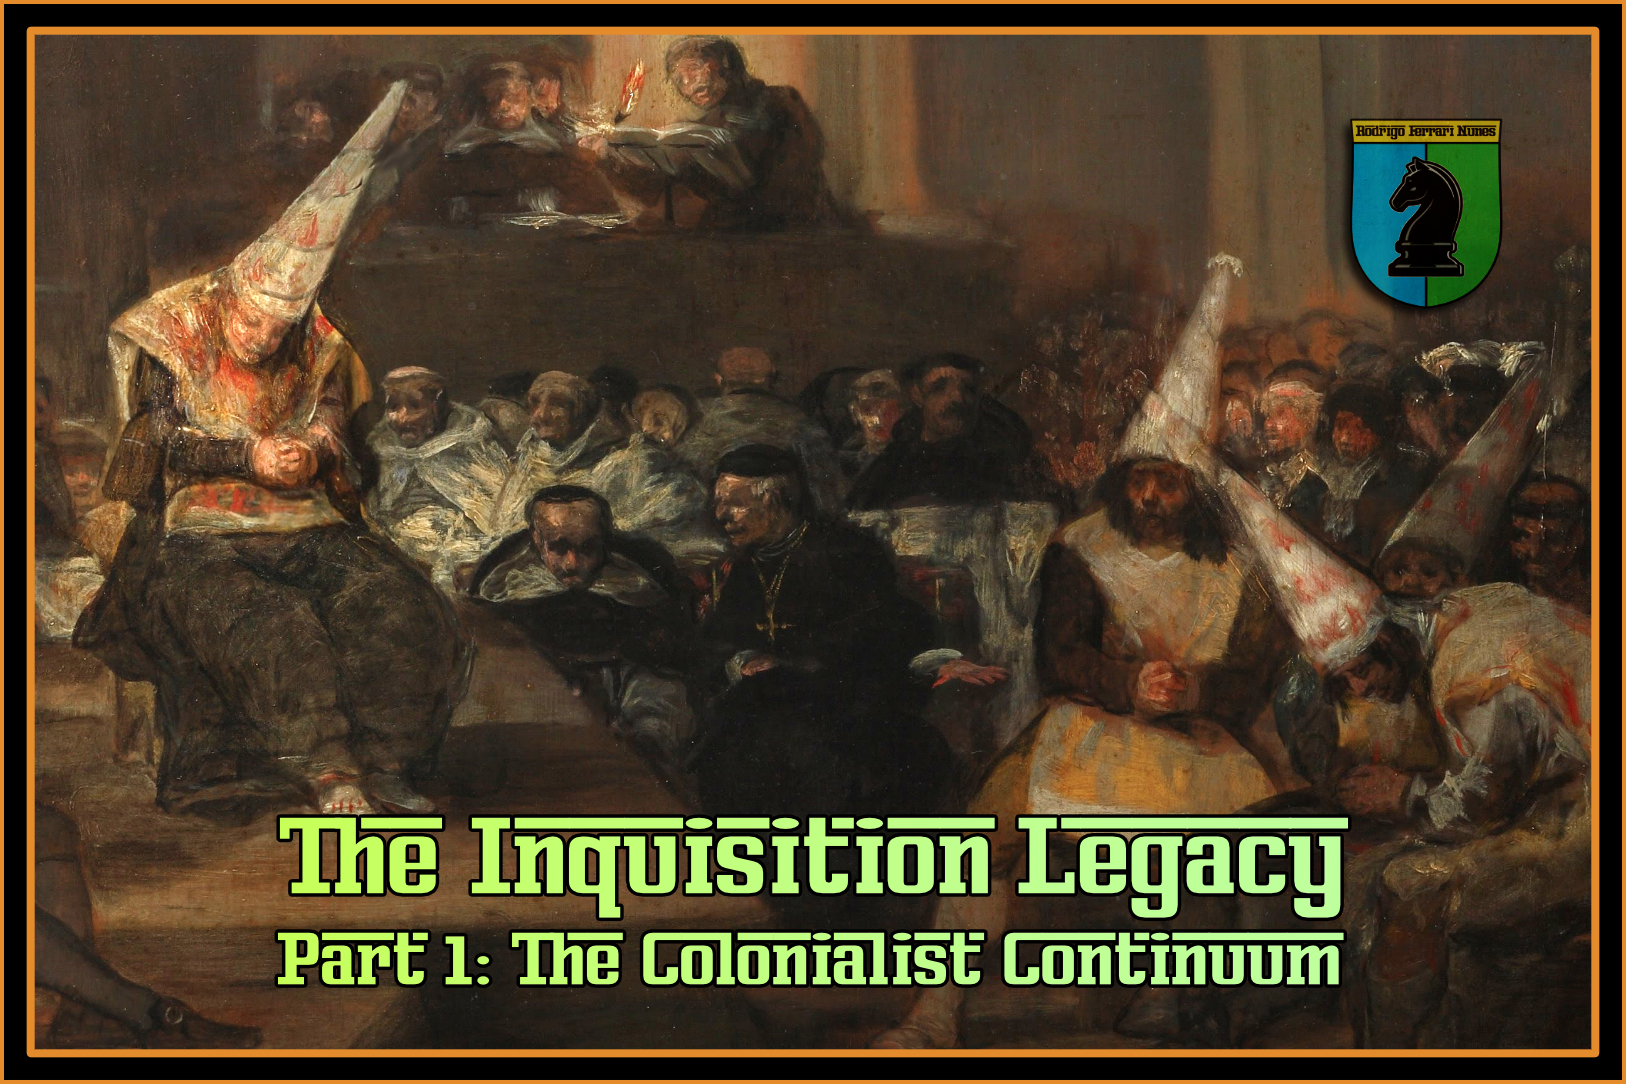 THE INQUISITION LEGACY, PART 1 – THE COLONIALIST CONTINUUM